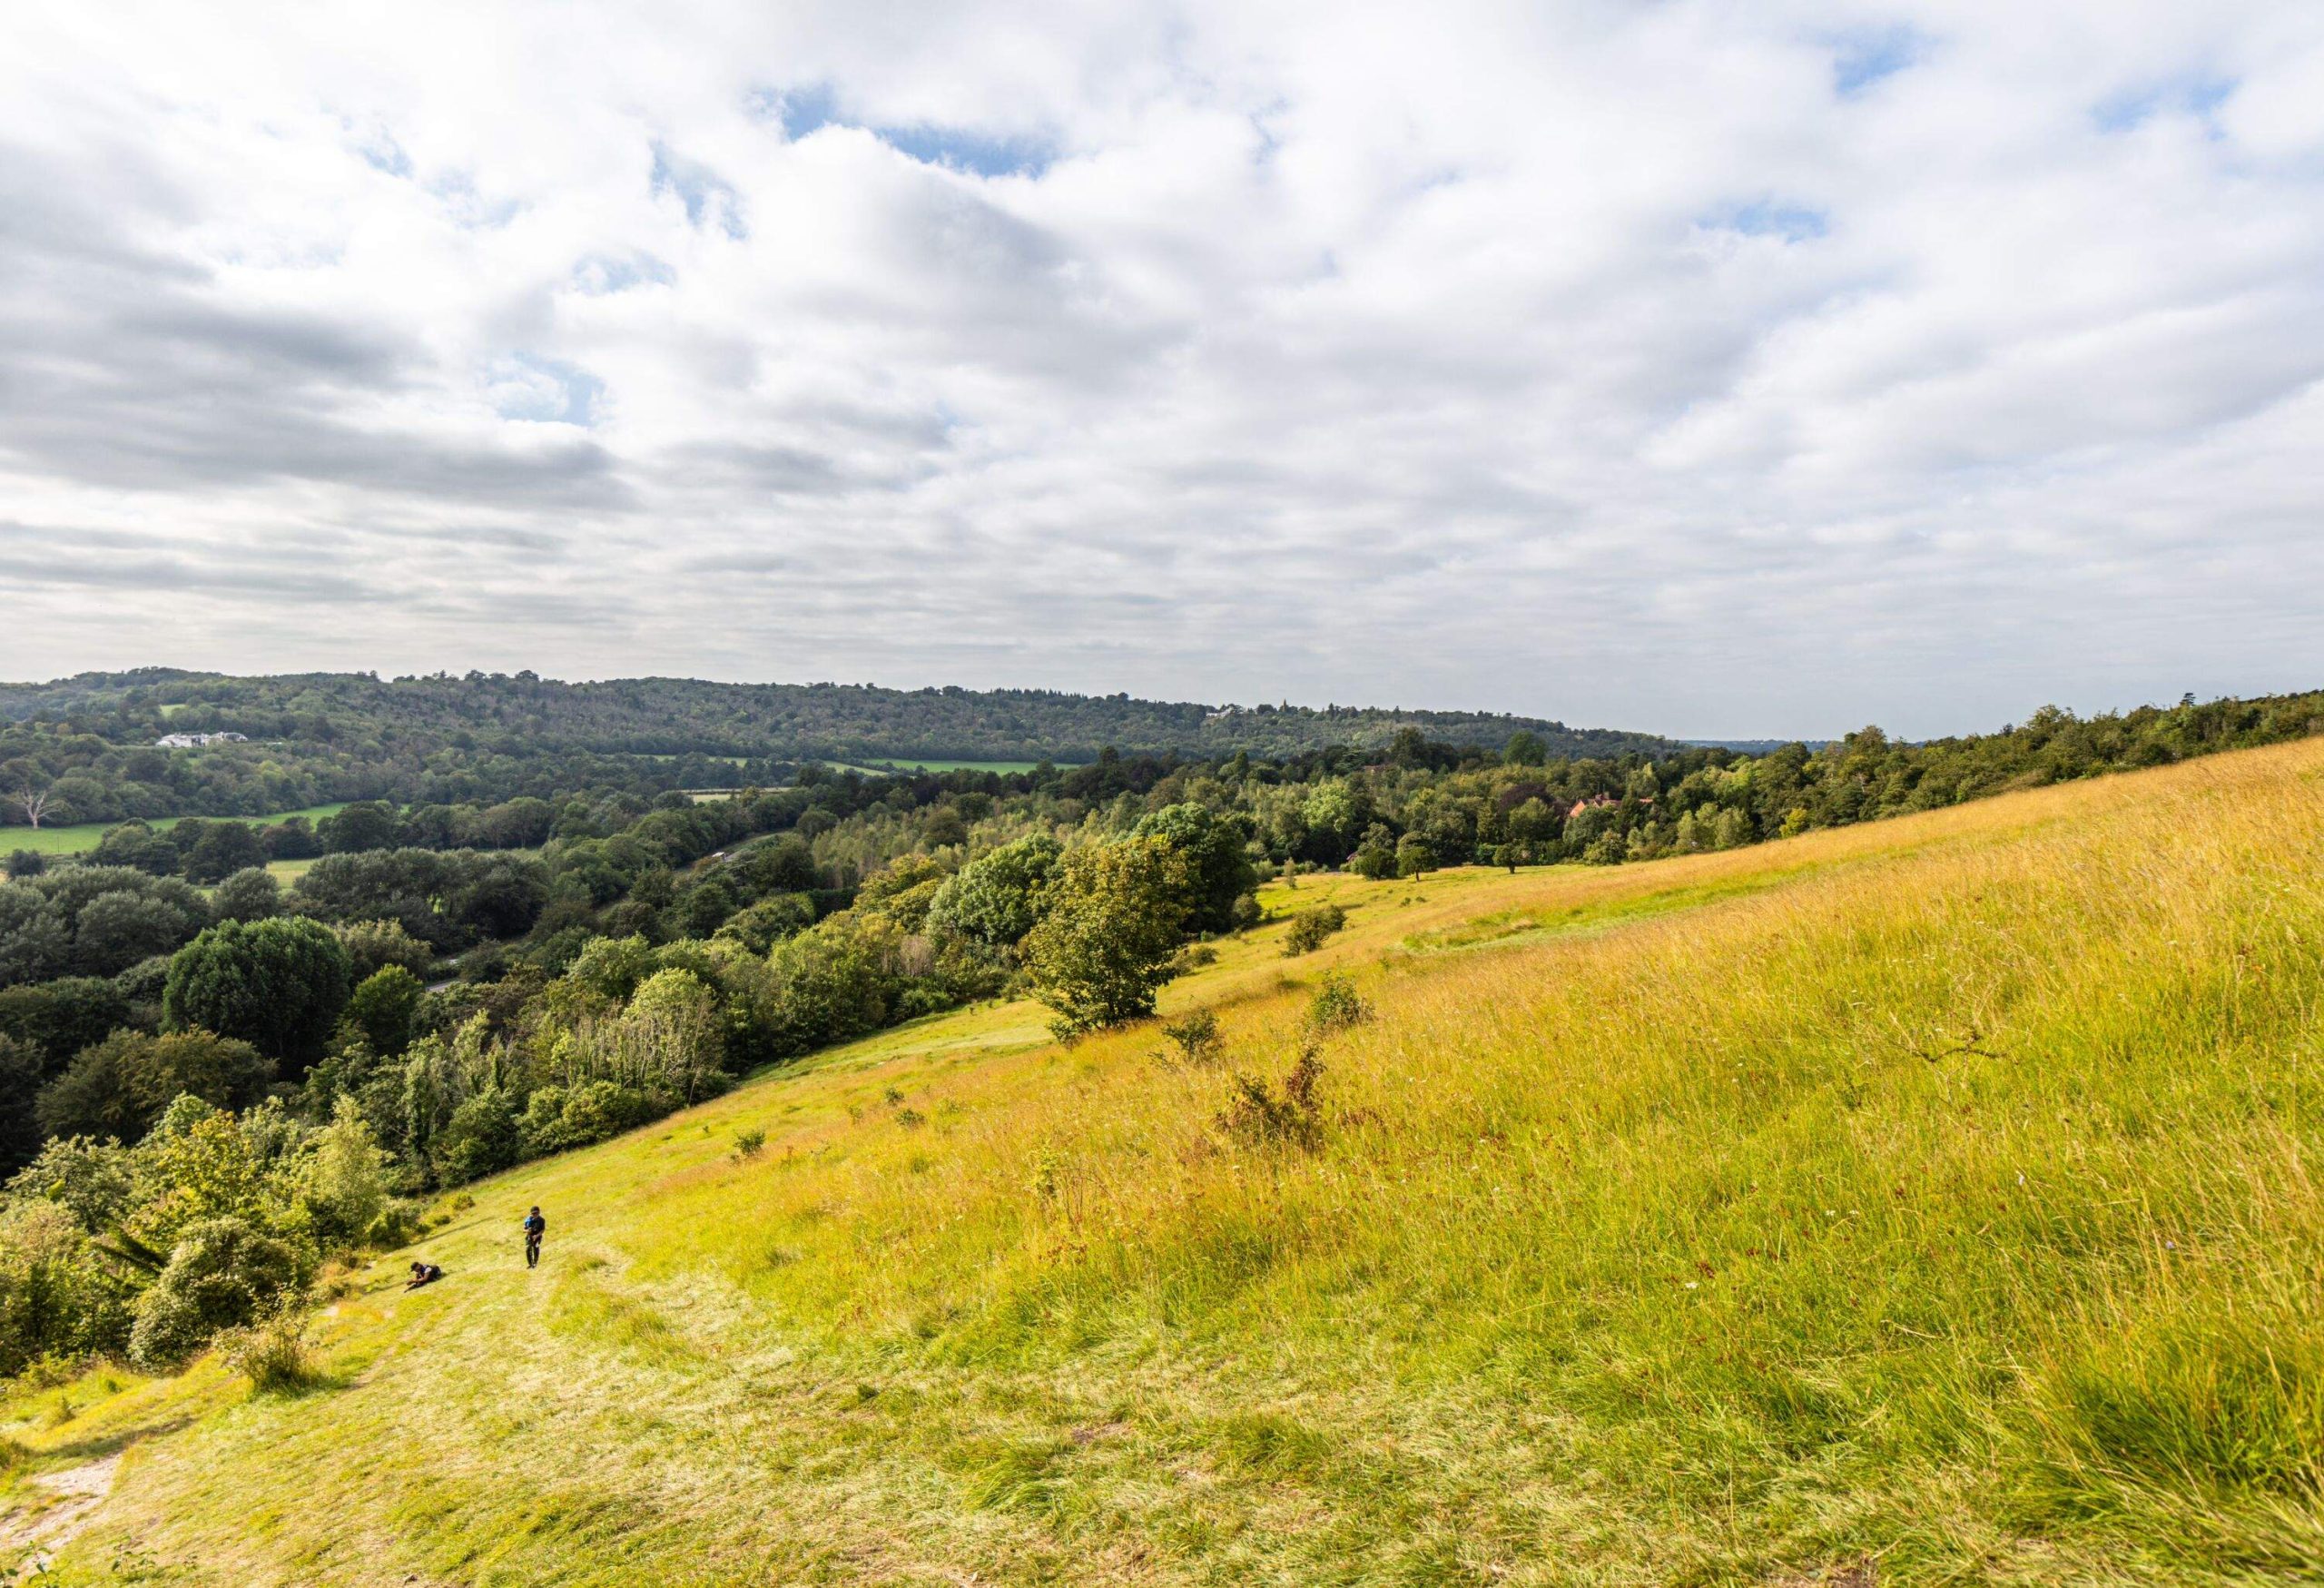 A view of surrey box hill